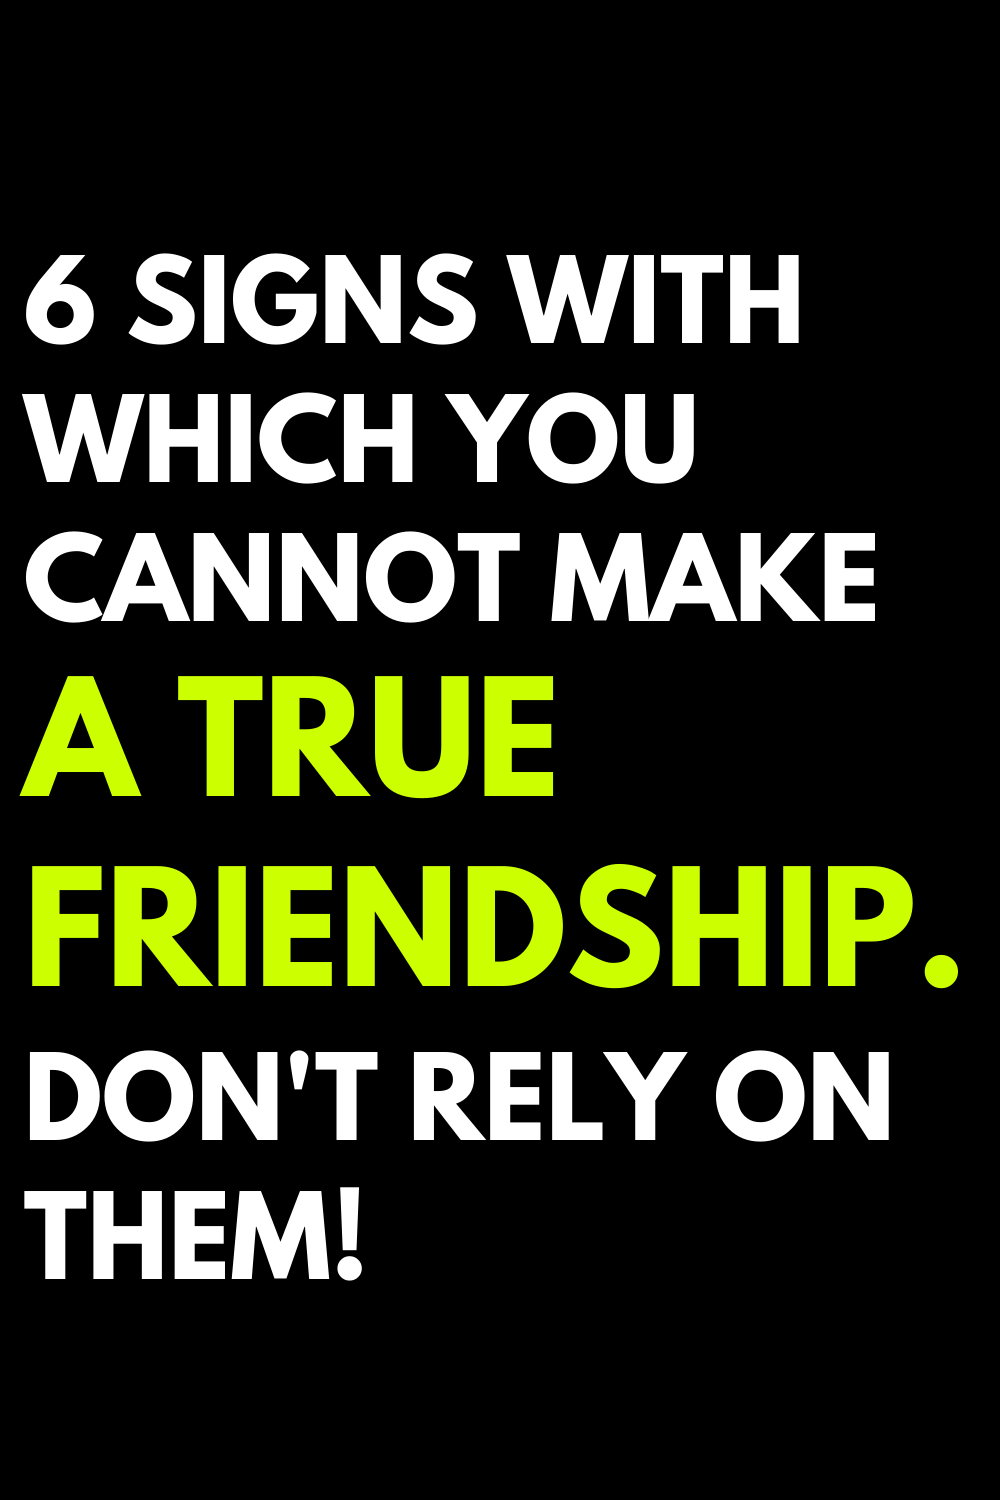 6 signs with which you cannot make a true friendship. Don't rely on them!